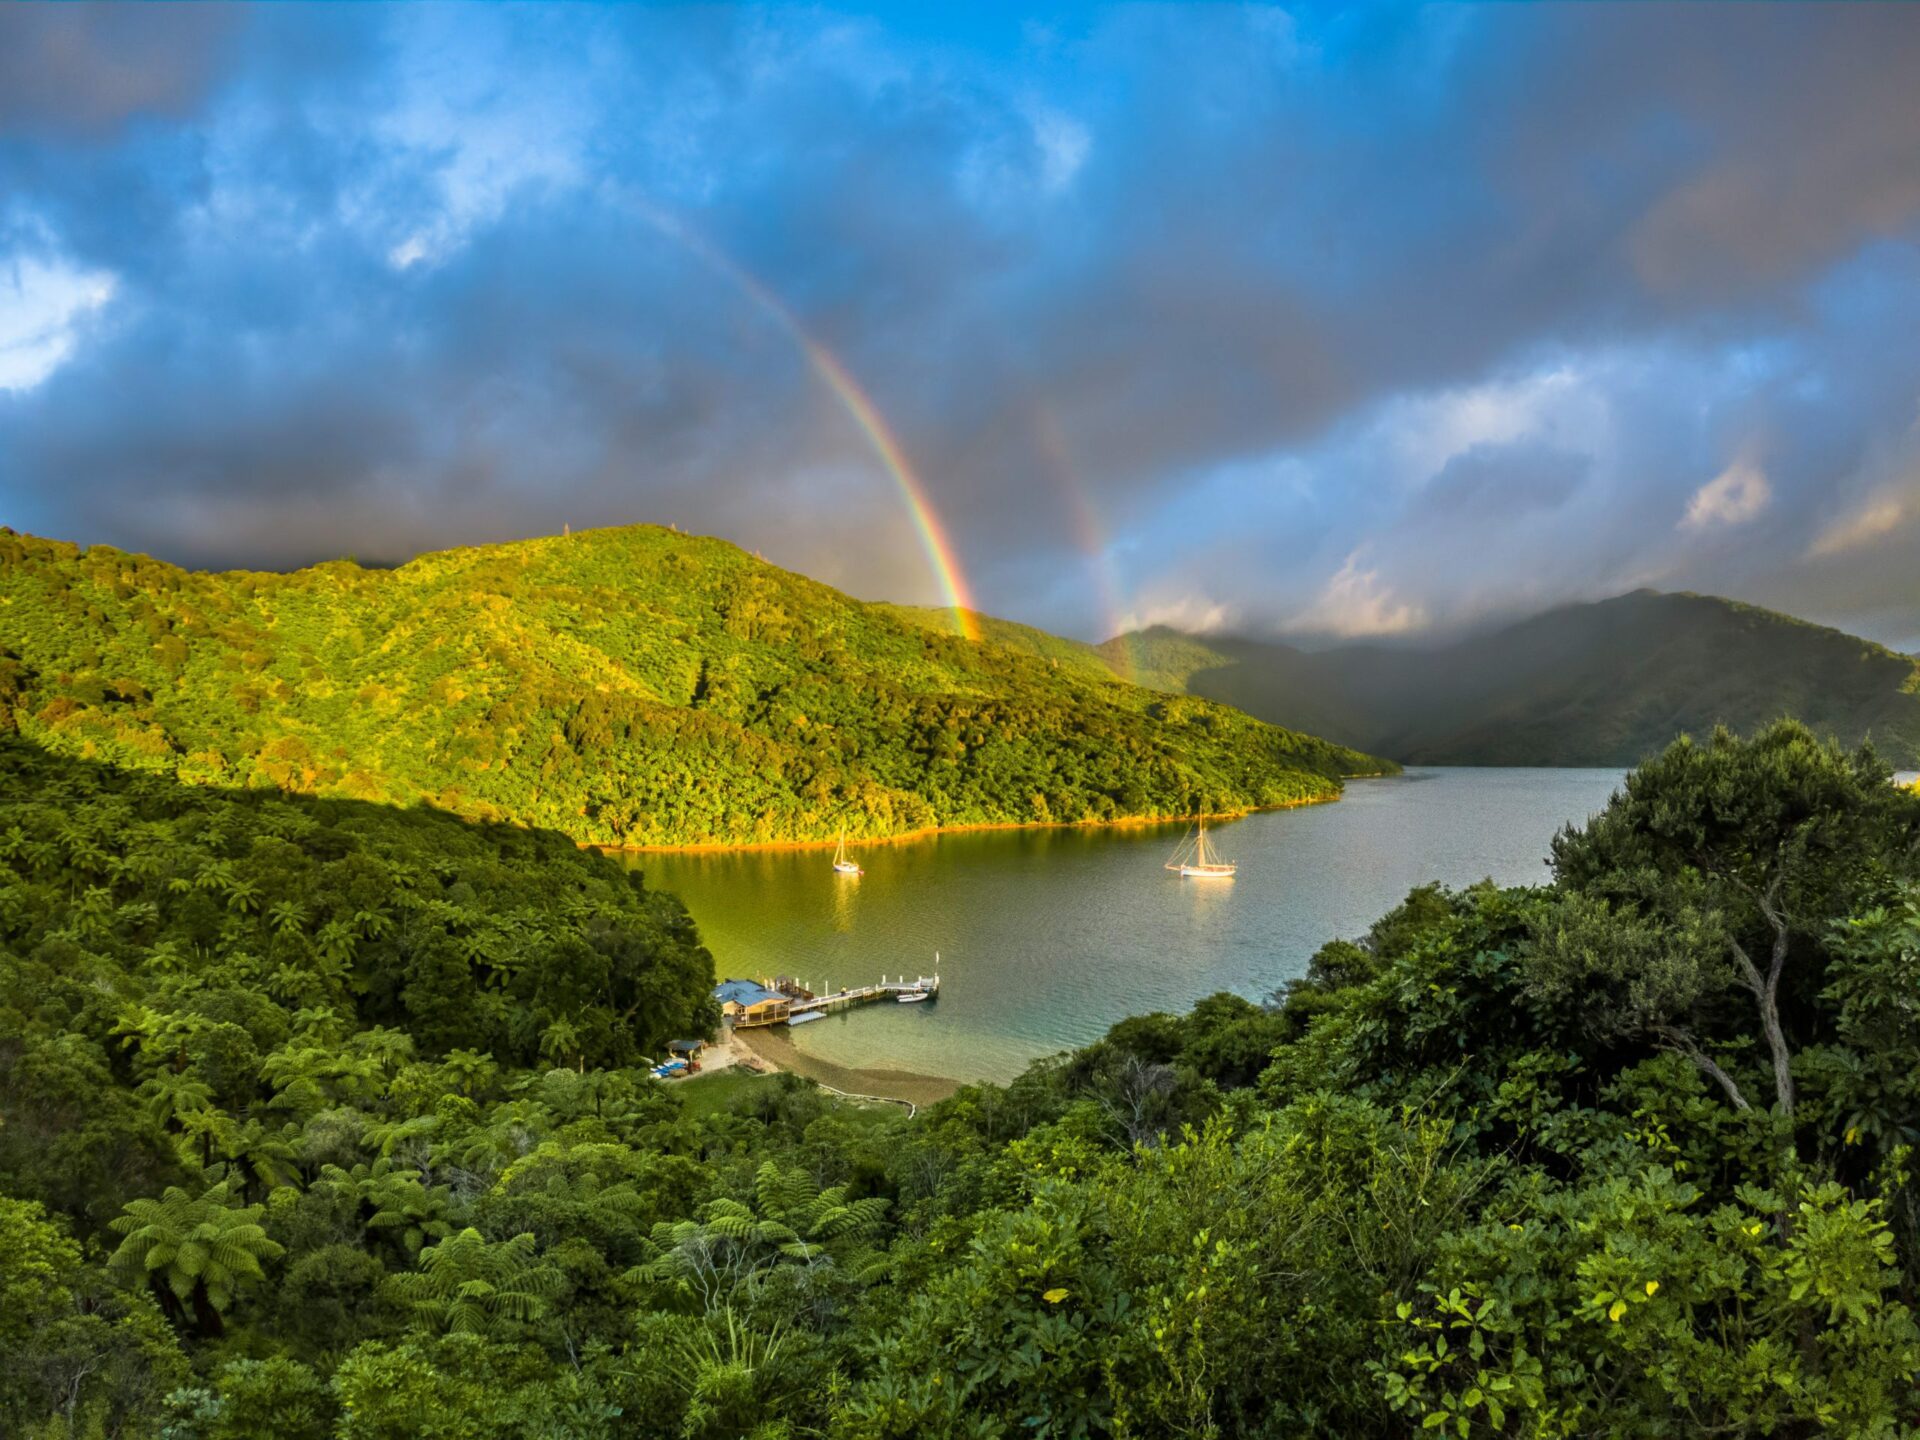 A rainbow over the mountains and sea in Marlborough Sounds.